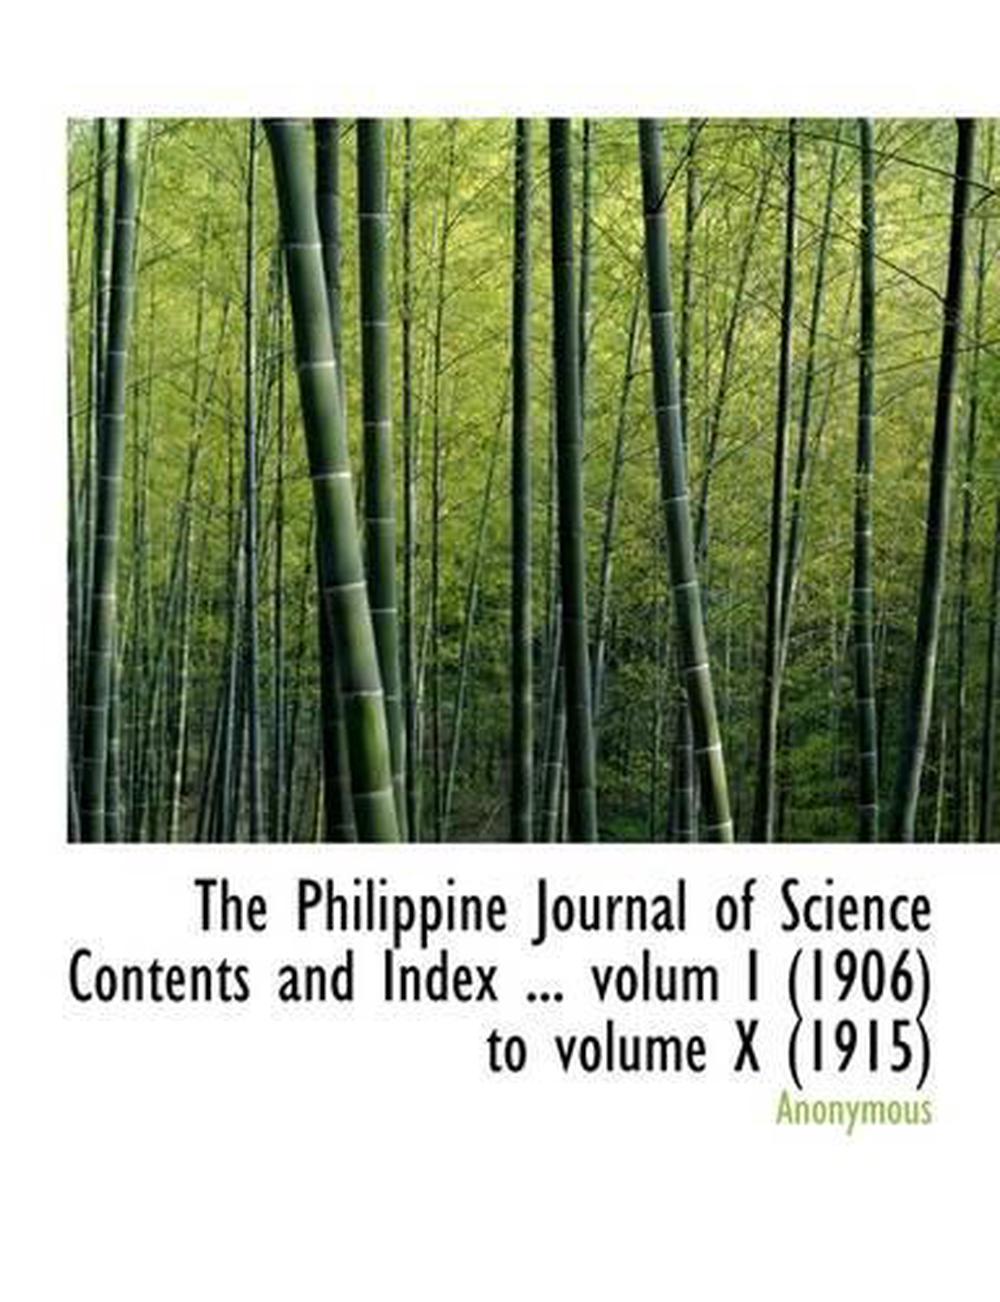 Philippine Journal of Science Contents and Index Volum I by